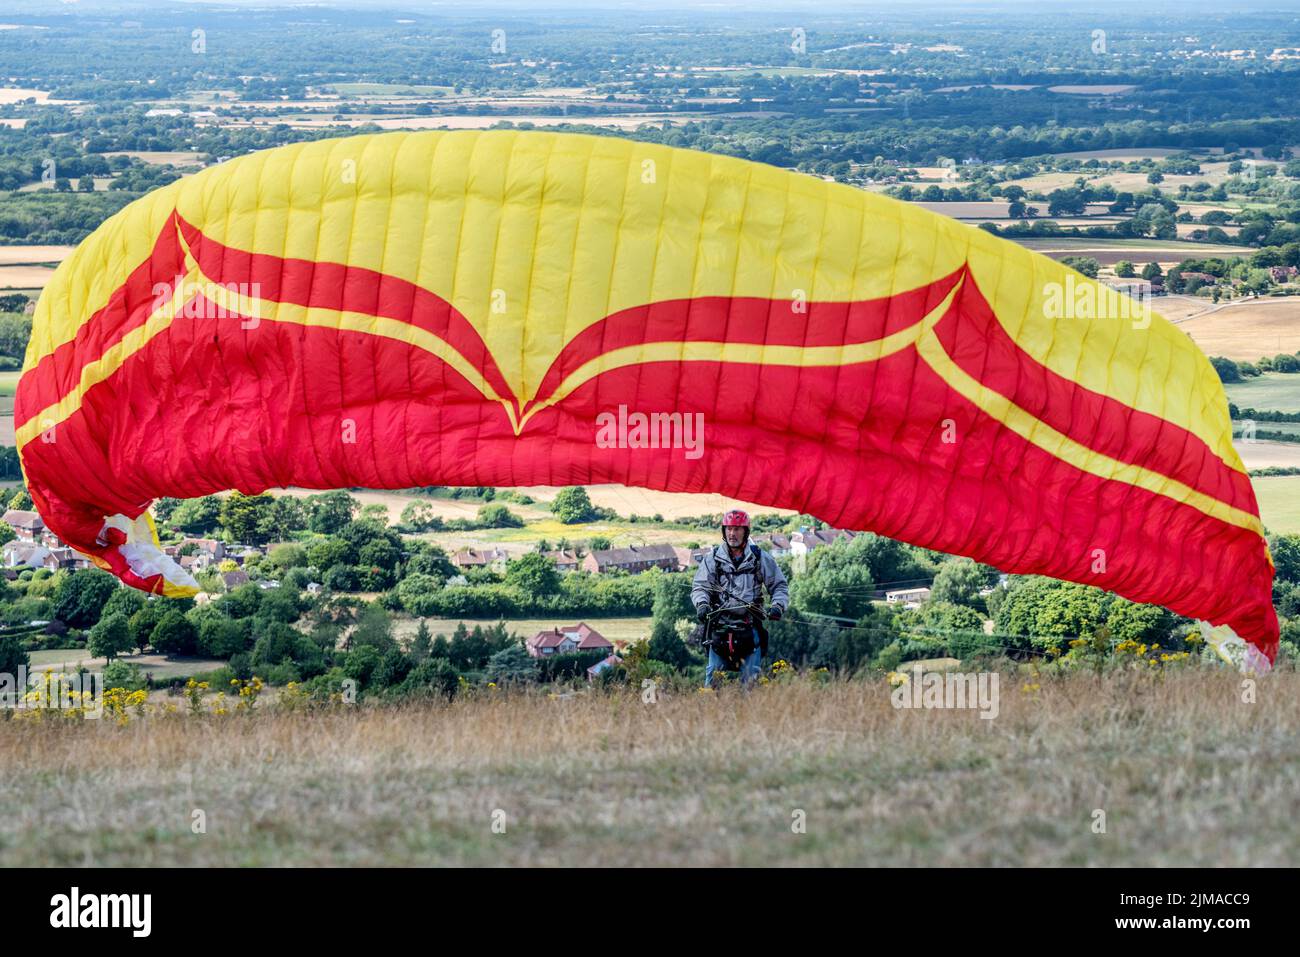 Brighton, August 5th 2022: Paragliders preparing for take-off at Devil's Dyke, in the South Downs National Park, near Brighton, East Sussex Credit: Andrew Hasson/Alamy Live News Stock Photo